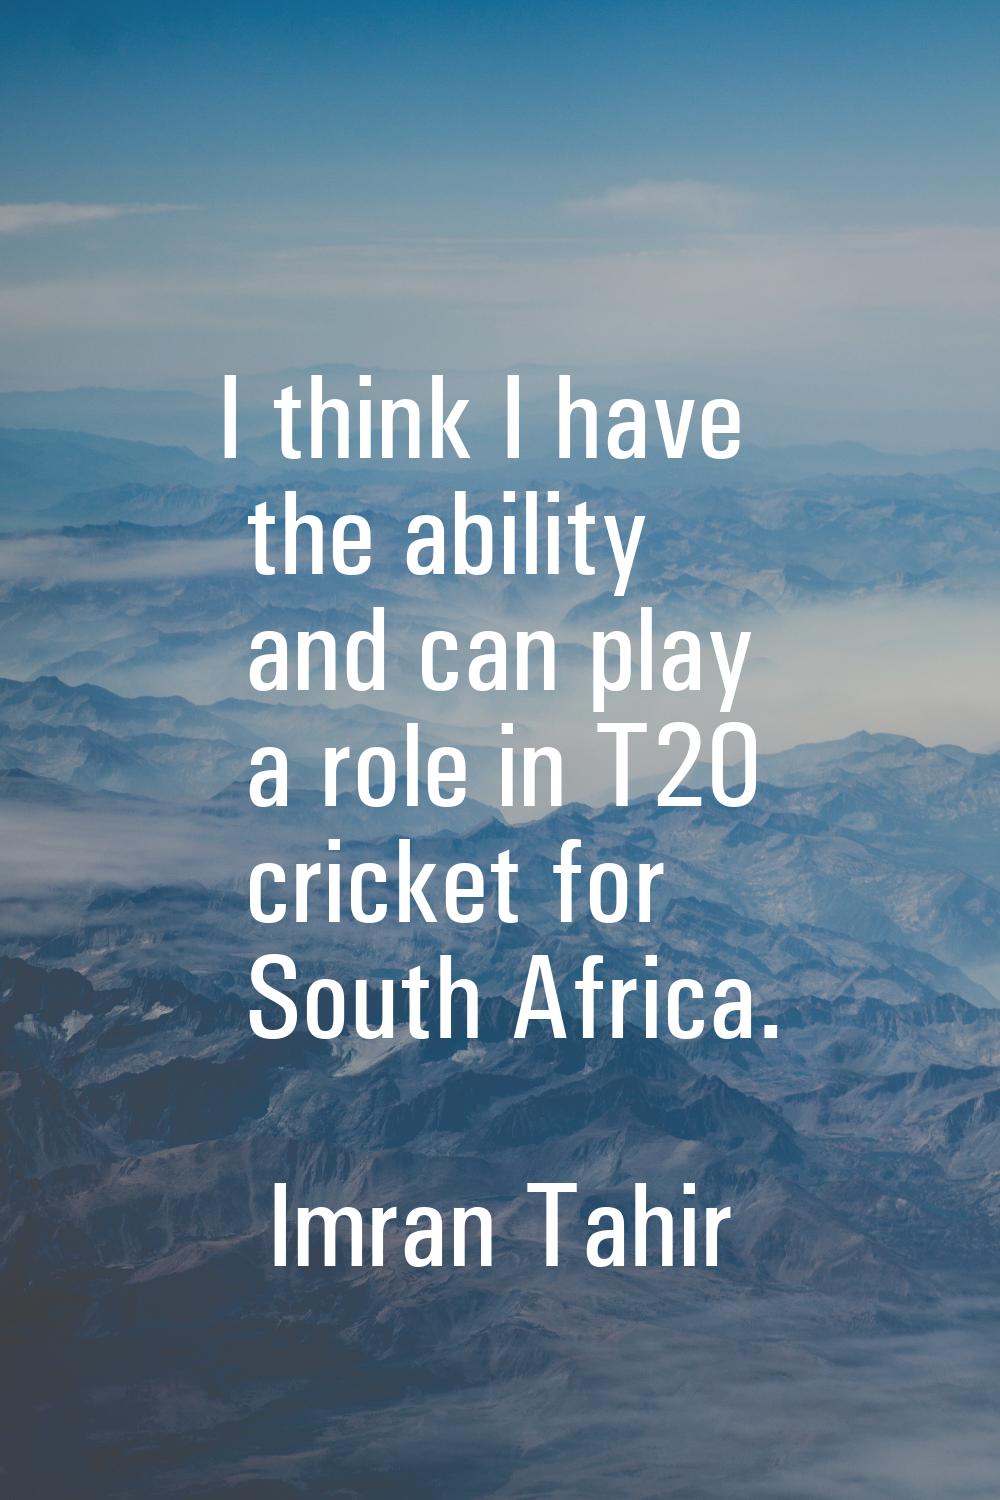 I think I have the ability and can play a role in T20 cricket for South Africa.